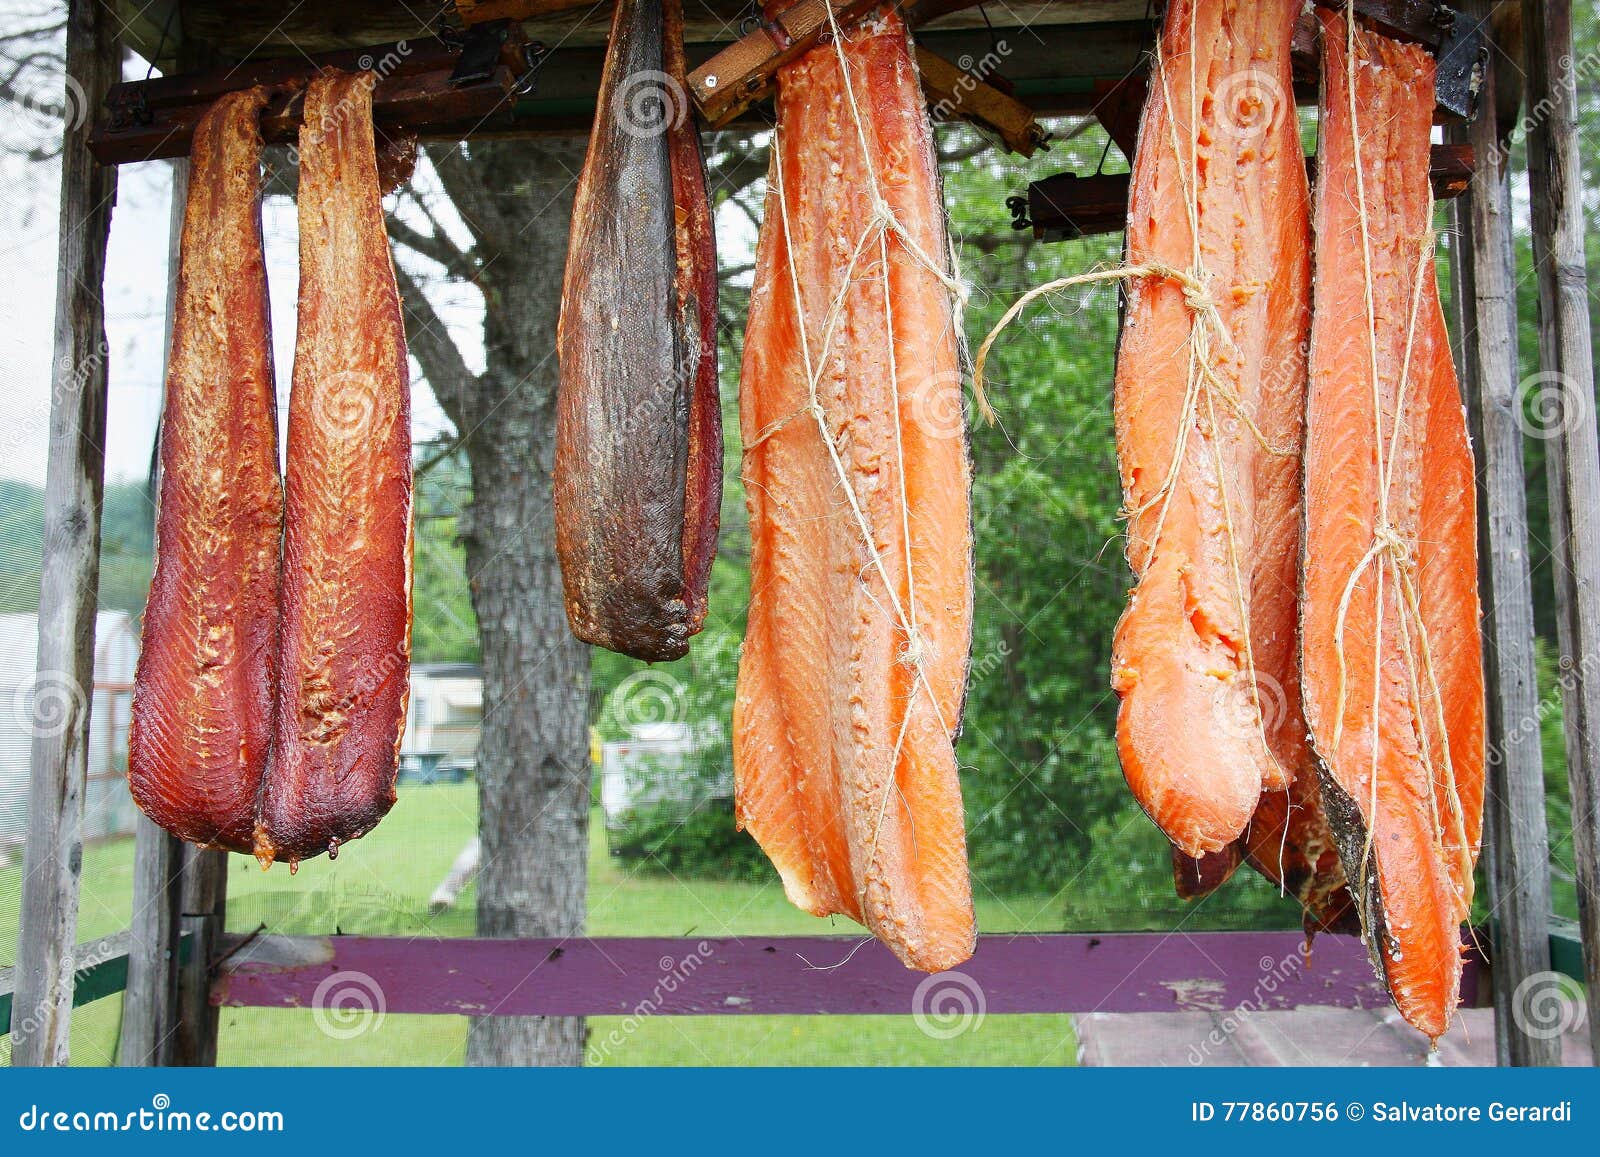 508 Fish Hanging To Dry Stock Photos - Free & Royalty-Free Stock